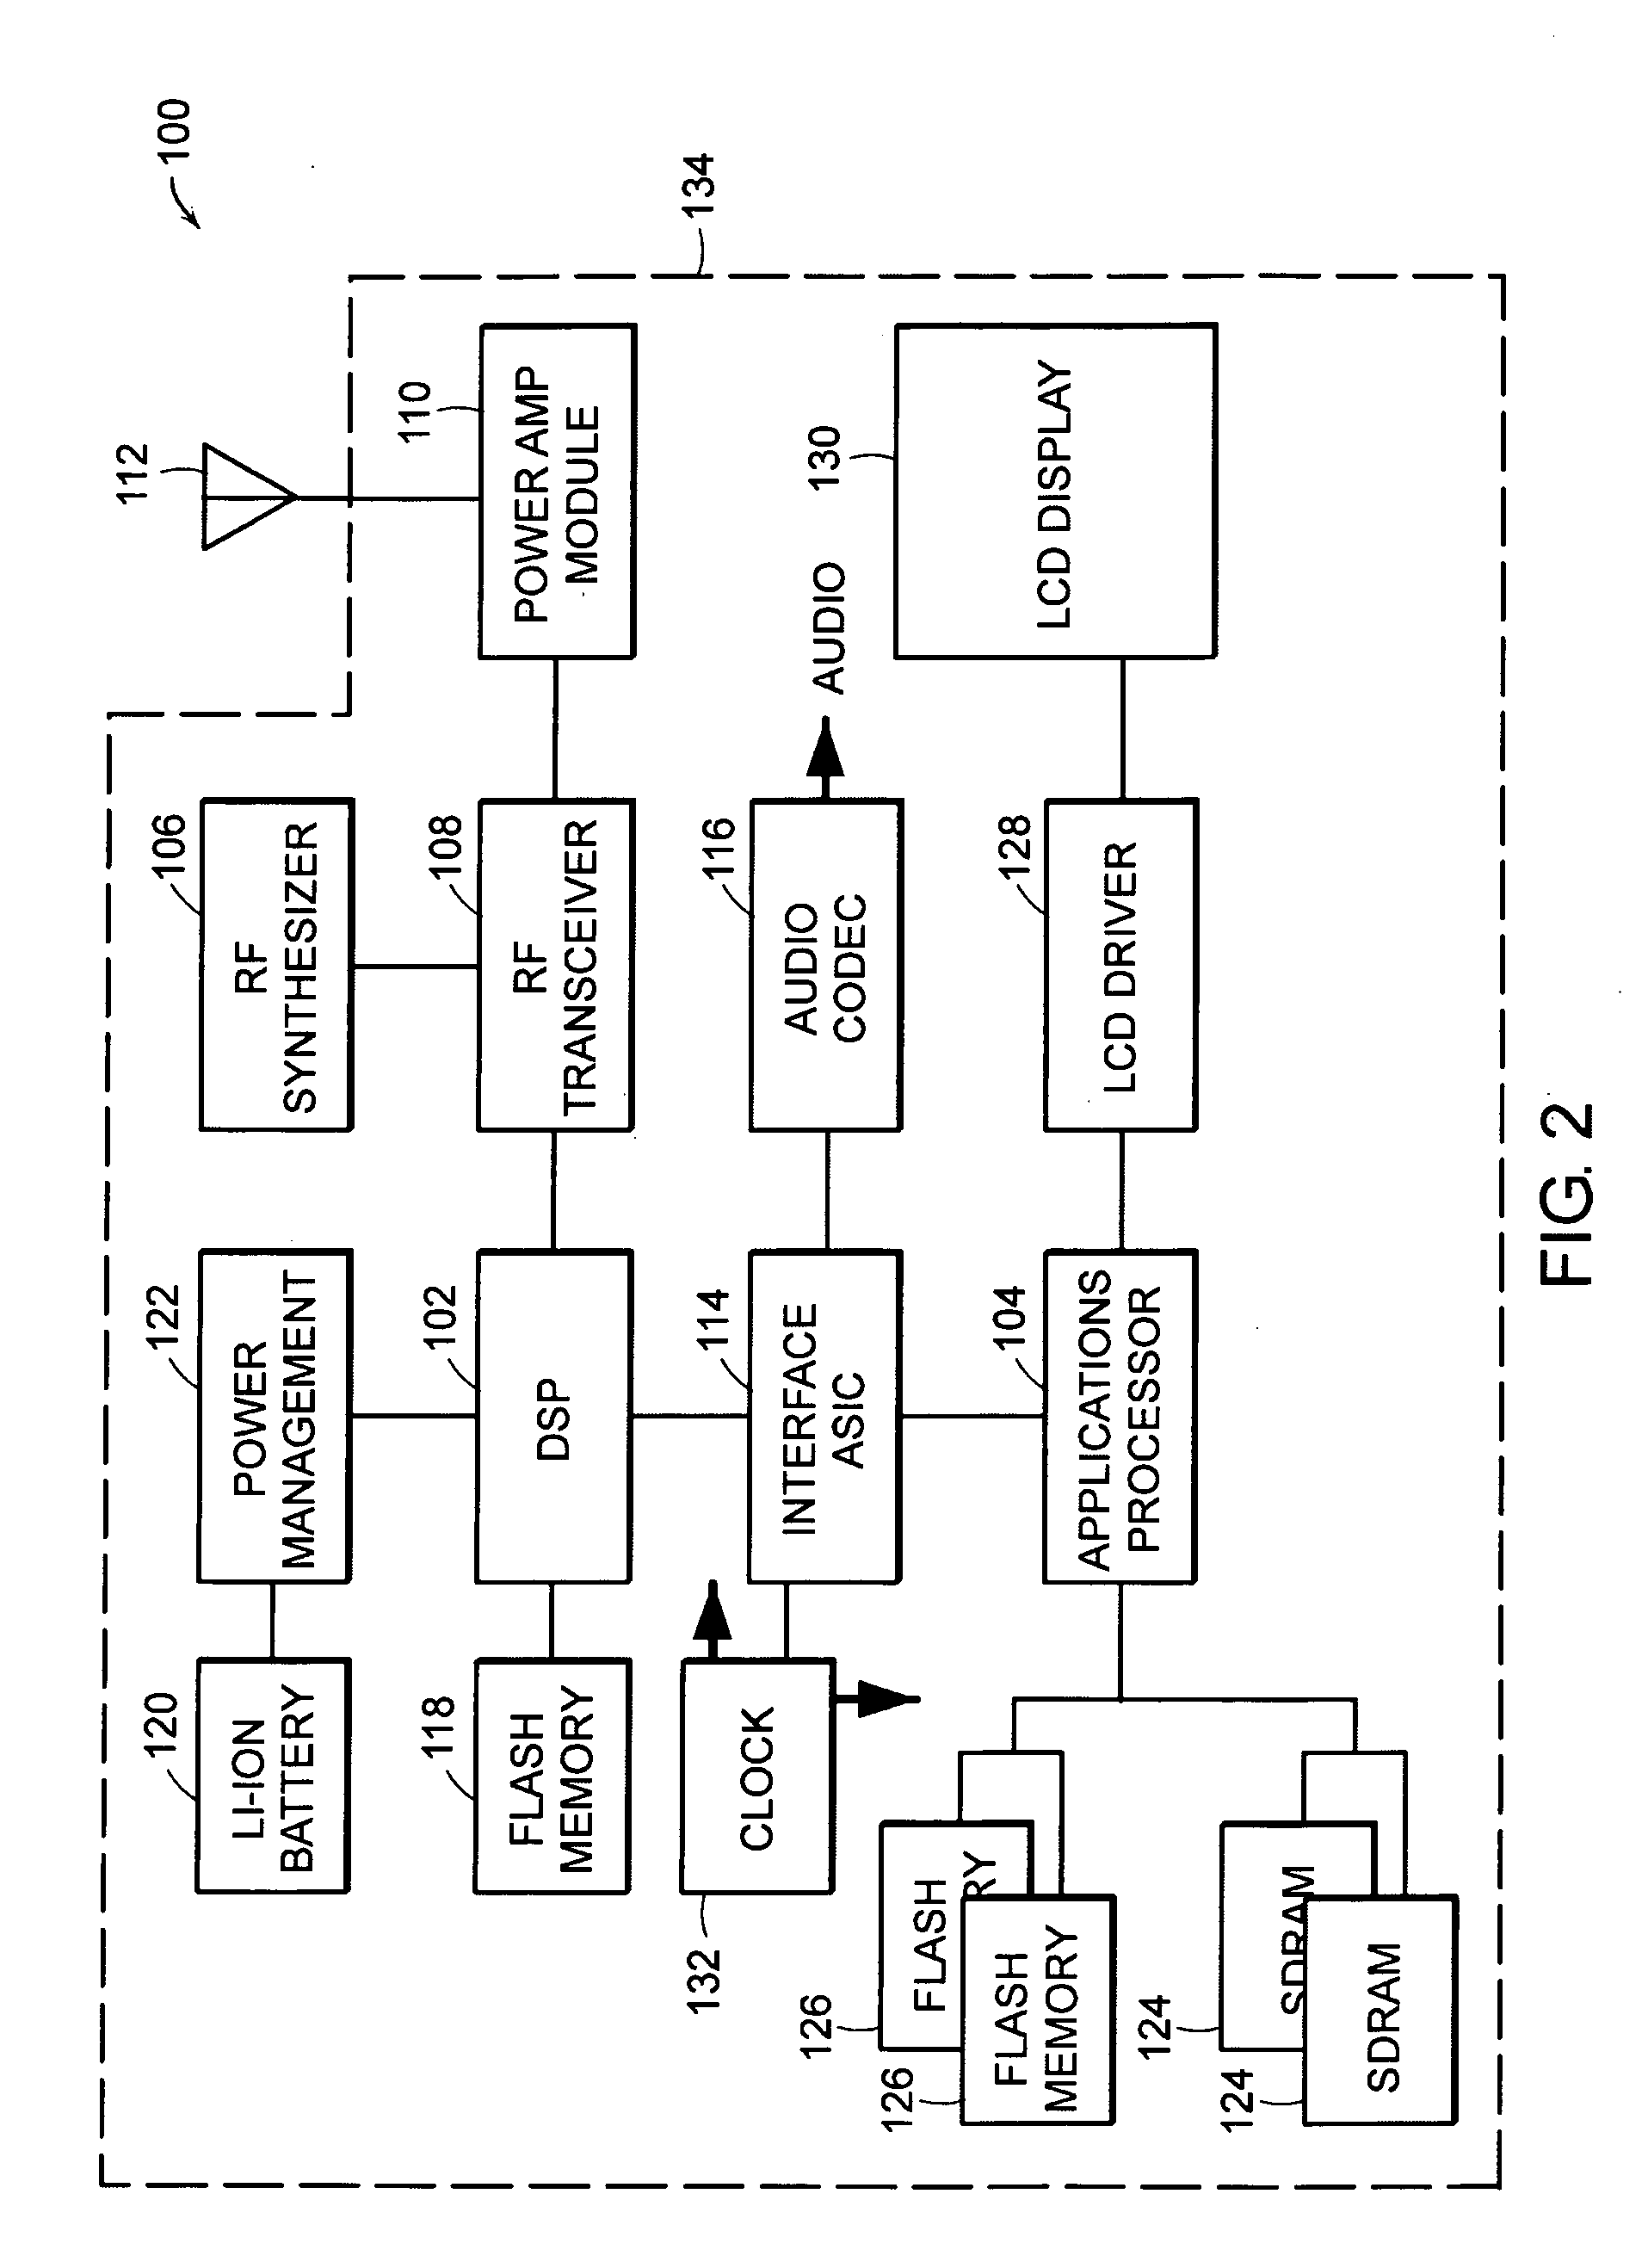 Installing language modules in a mobile communication device